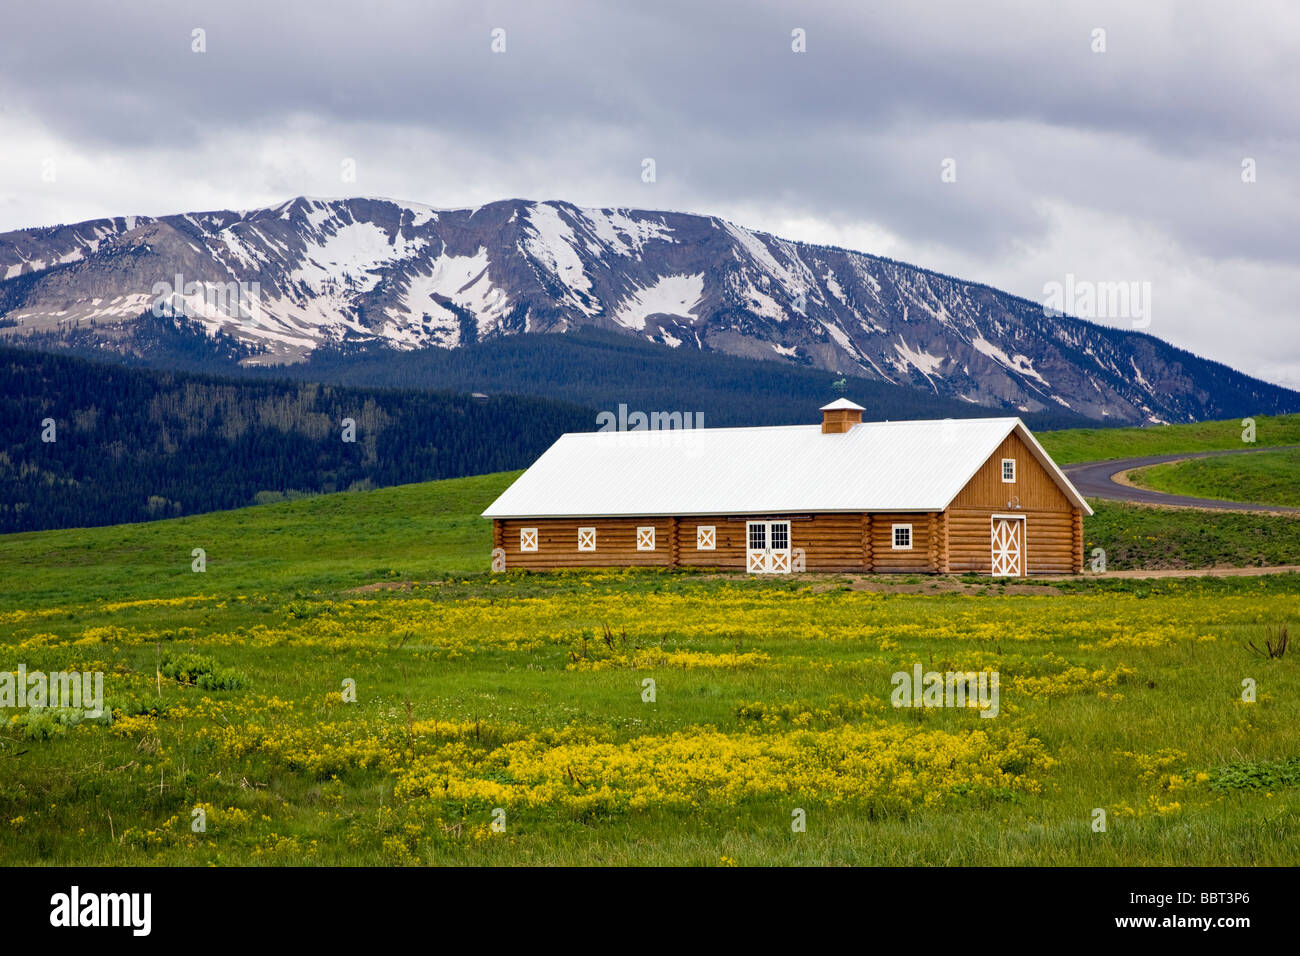 Log horse barn in a pasture full of yellow wildflowers Crested Butte Colorado USA Stock Photo